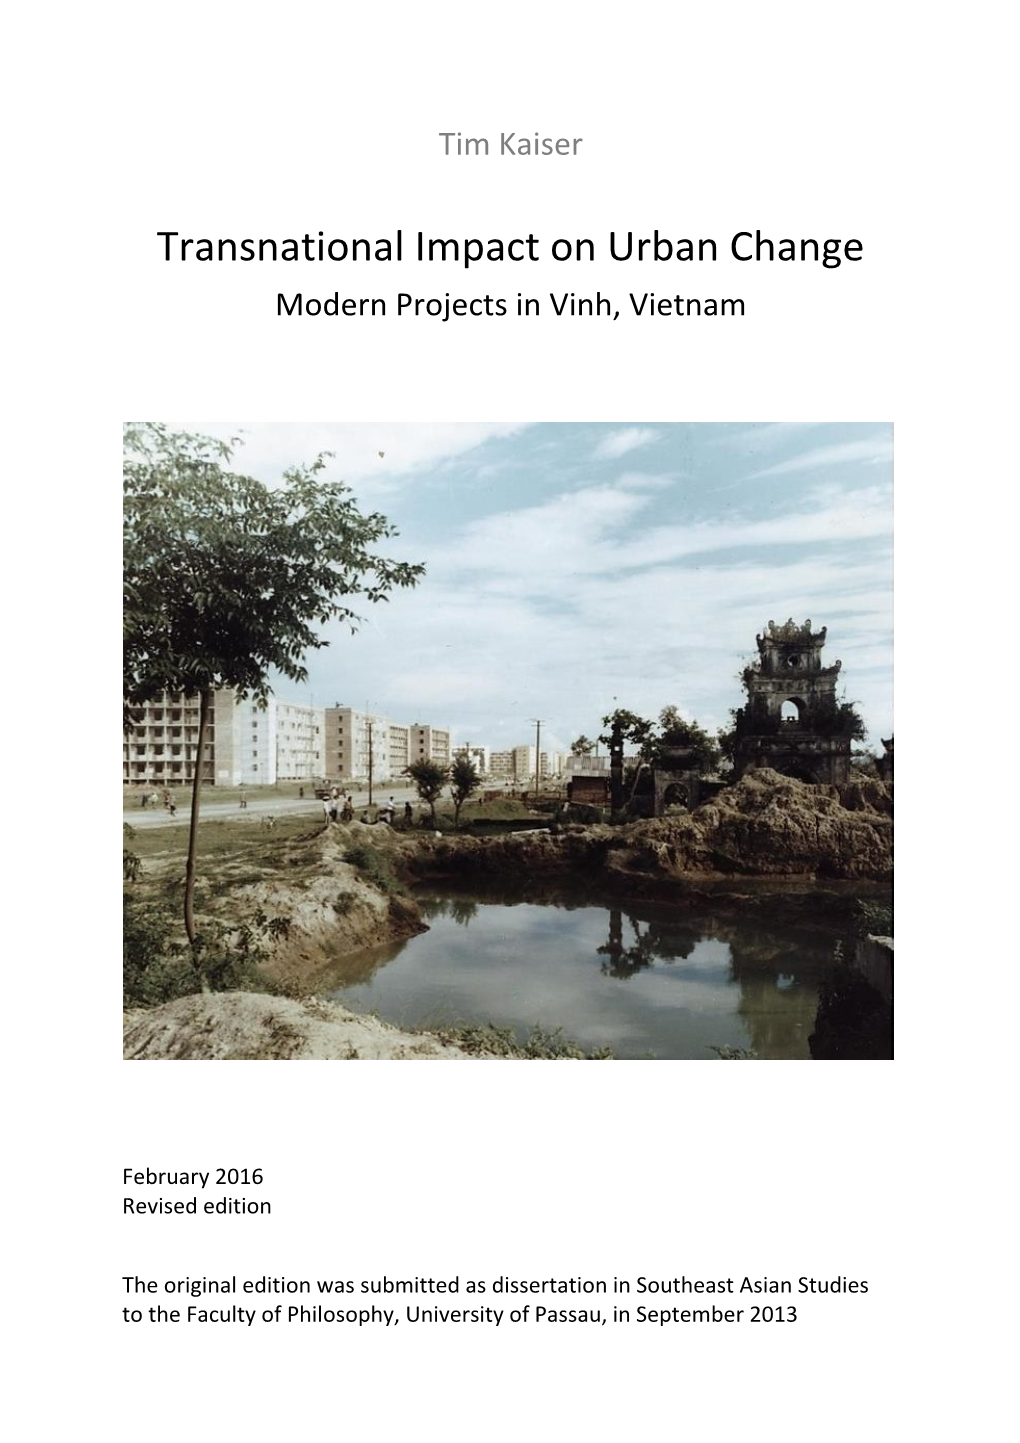 Transnational Impact on Urban Change: Modern Projects in Vinh